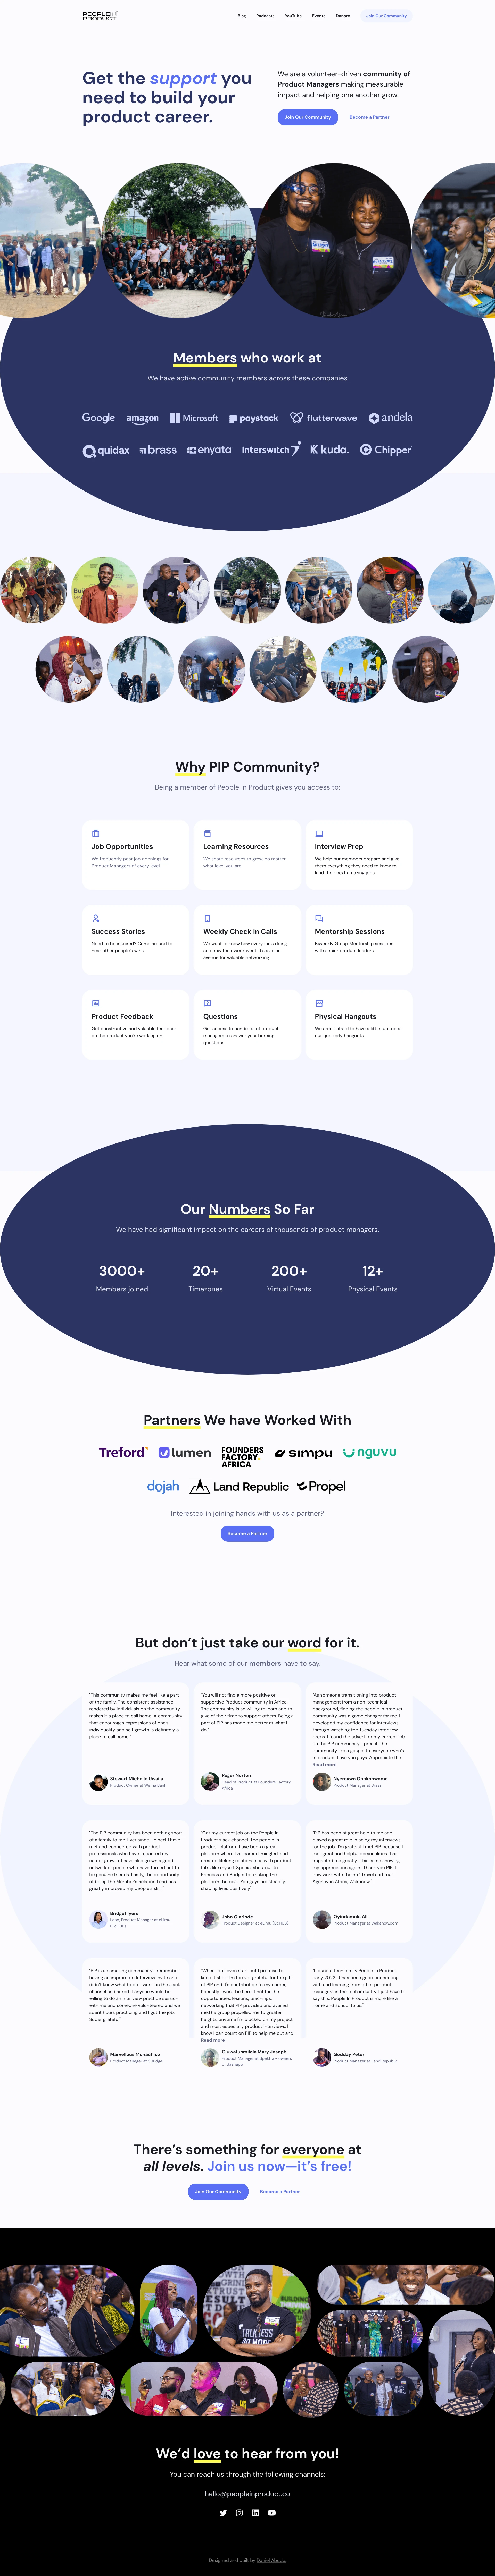 People in Product Landing Page Example: We are a volunteer-driven community of Product Managers making measurable impact and helping one another grow. Get the support you need to build your product career.